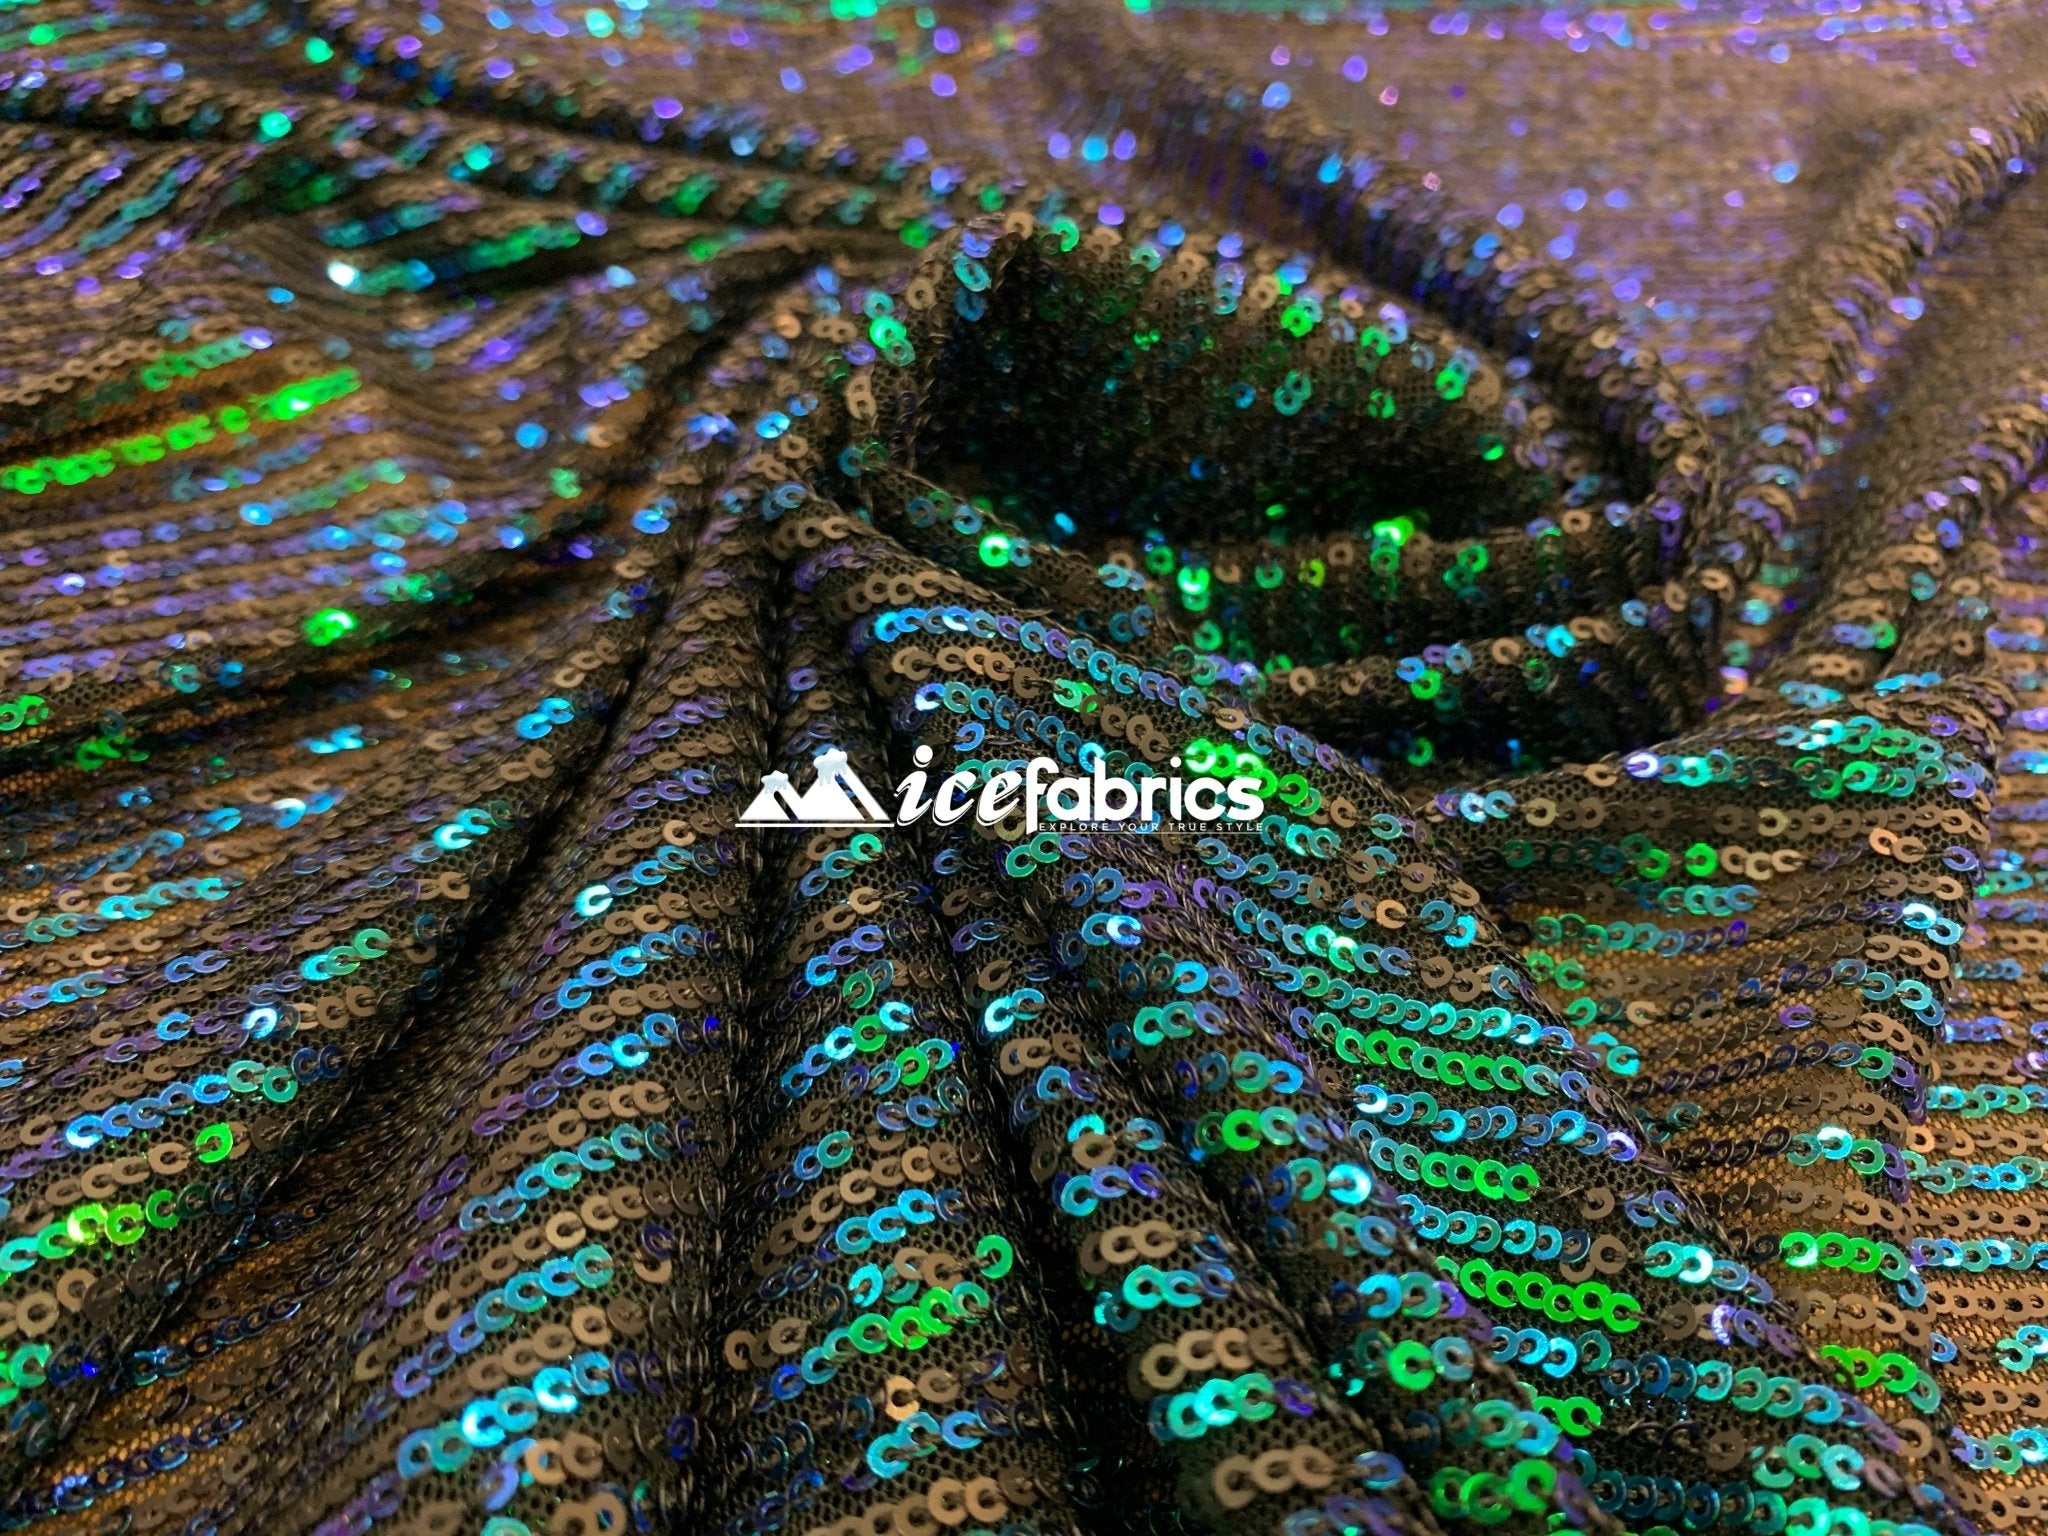 Iridescent Sequin 2 Way Mesh Stretch Sequins Fabric By The YardICEFABRICICE FABRICSYellow IridescentIridescent Sequin 2 Way Mesh Stretch Sequins Fabric By The Yard ICEFABRIC Green Iridescent